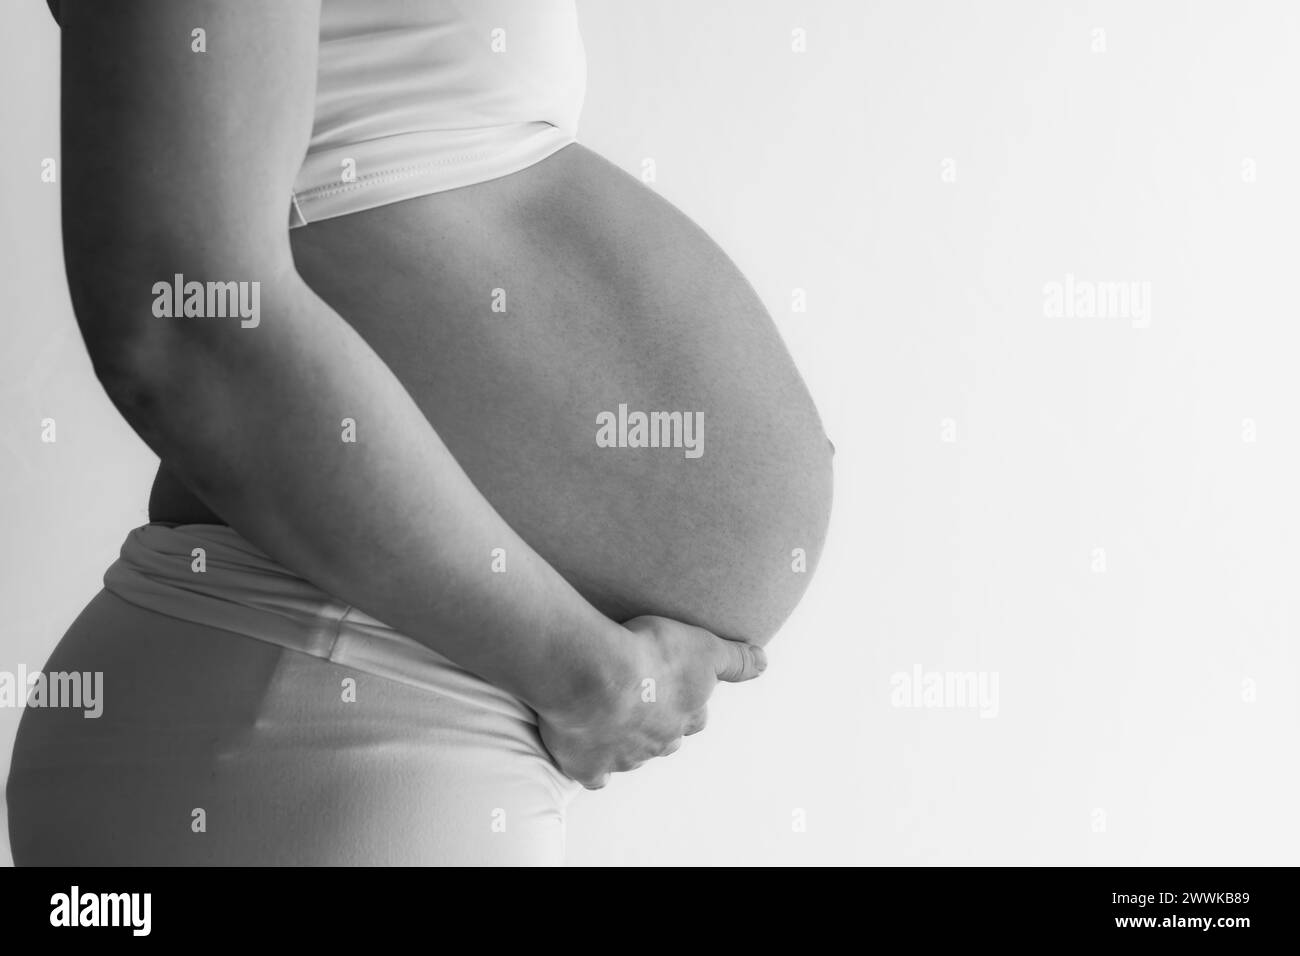 Description: Midsection of unrecognizable standing mother in white cloths with very round pregnant baby belly. Final month of pregnancy - week 36. Sid Stock Photo